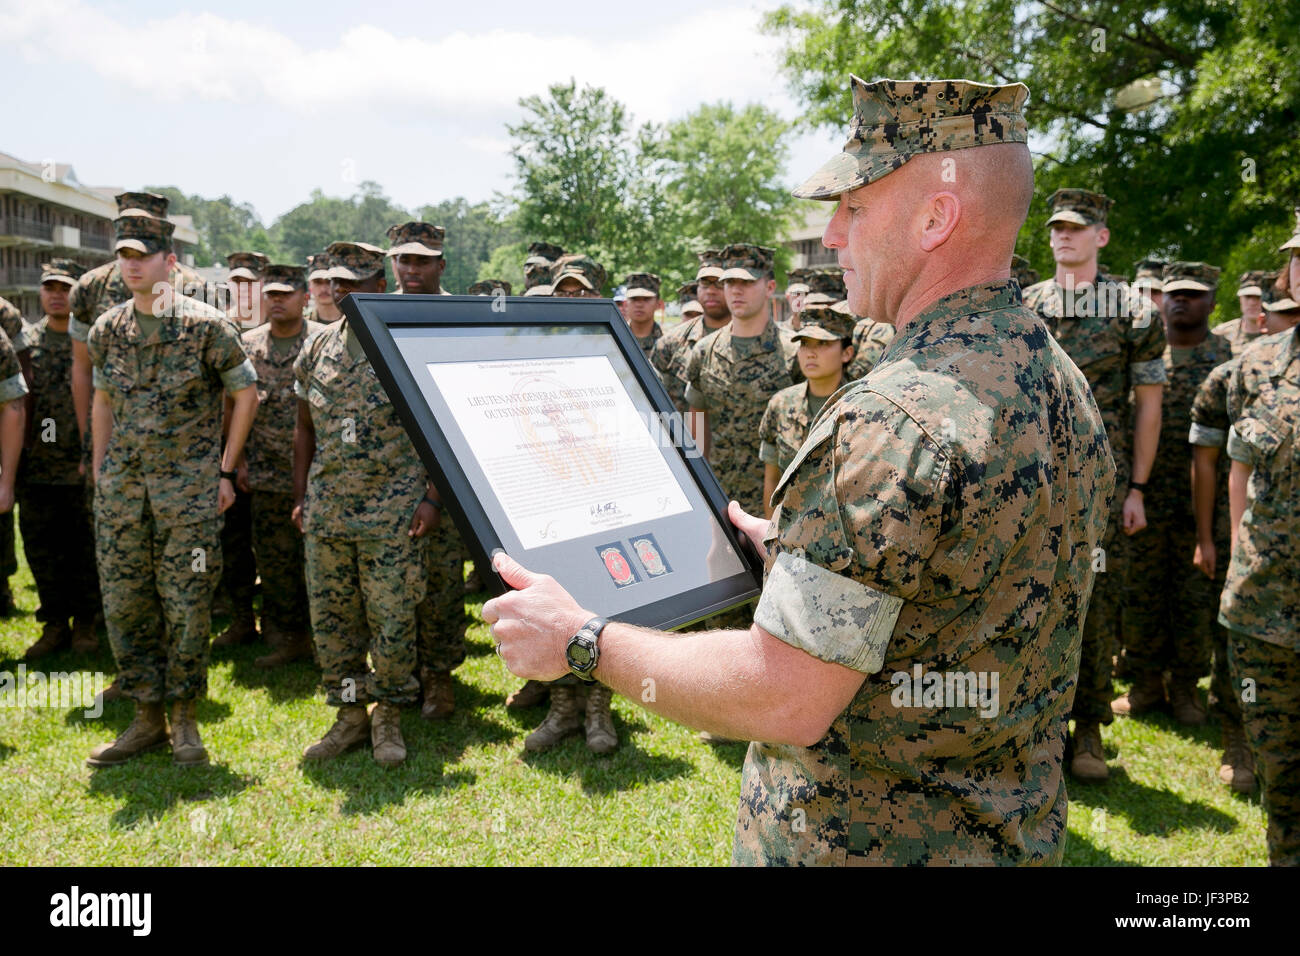 U.S. Marine Corps Sgt. Maj. Richard D. Thresher, sergeant major, II Marine Expeditionary Force (II MEF), reads the citation for the “Lt. Gen. Chesty Puller” Outstanding Leadership Award as it is being presented to the Marines and Sailors of 2nd Medical Battalion, II MEF, Camp Lejeune, N.C., May 10, 2017. The battalion earned this award for exceptional professional ability, superior performance and dedication to supporting the mission of the II MEF. (U.S. Marine Corps photo by Sgt. Kelly L. Street) Stock Photo